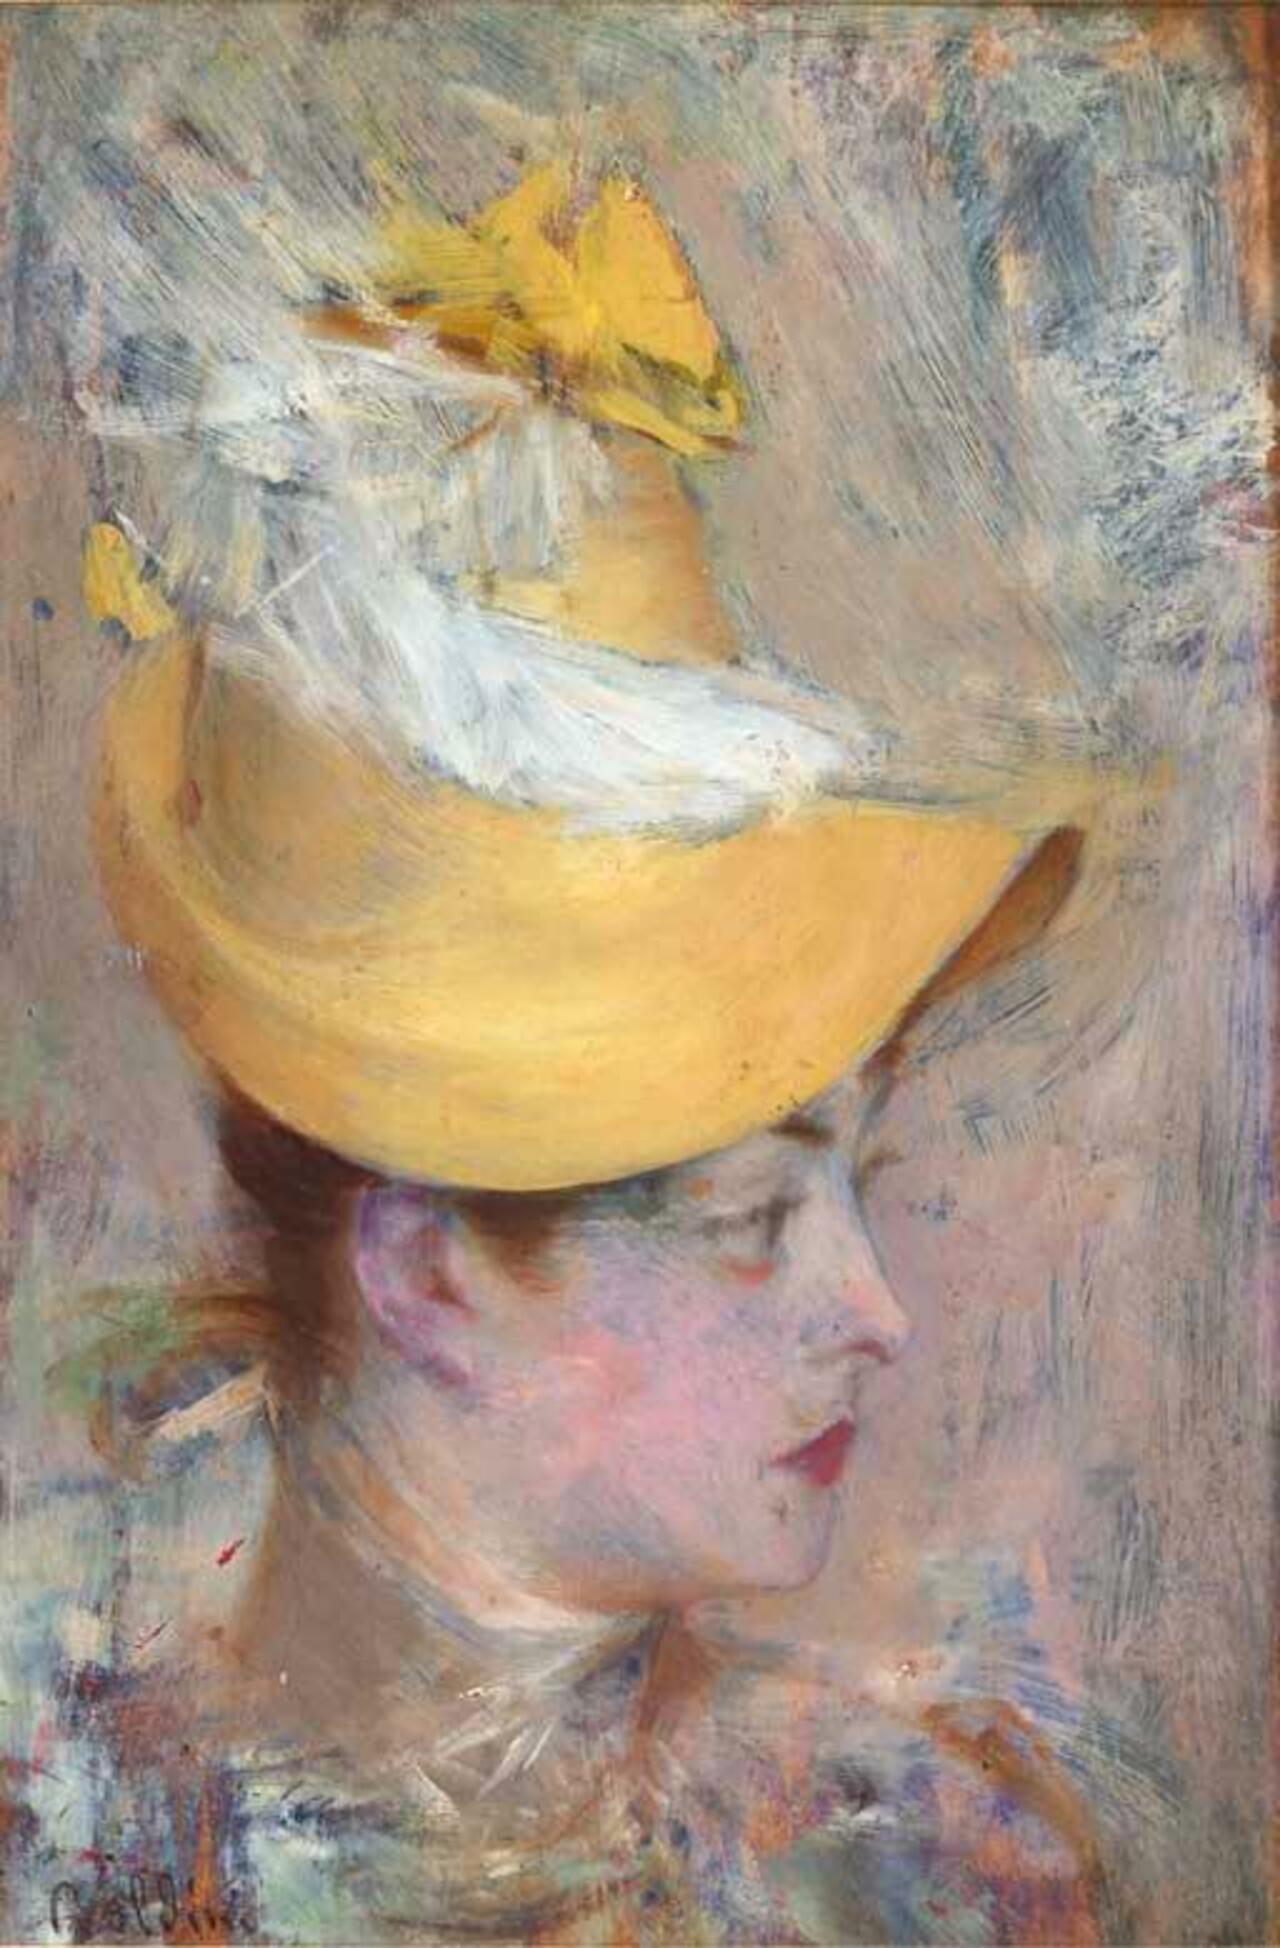 #Impressionism #DonneInGiallo #ArtLovers 

Giovanni #Boldini
Head of a Lady with Yellow Sleeve,1890

@alecoscino http://t.co/w4HtQABNX3